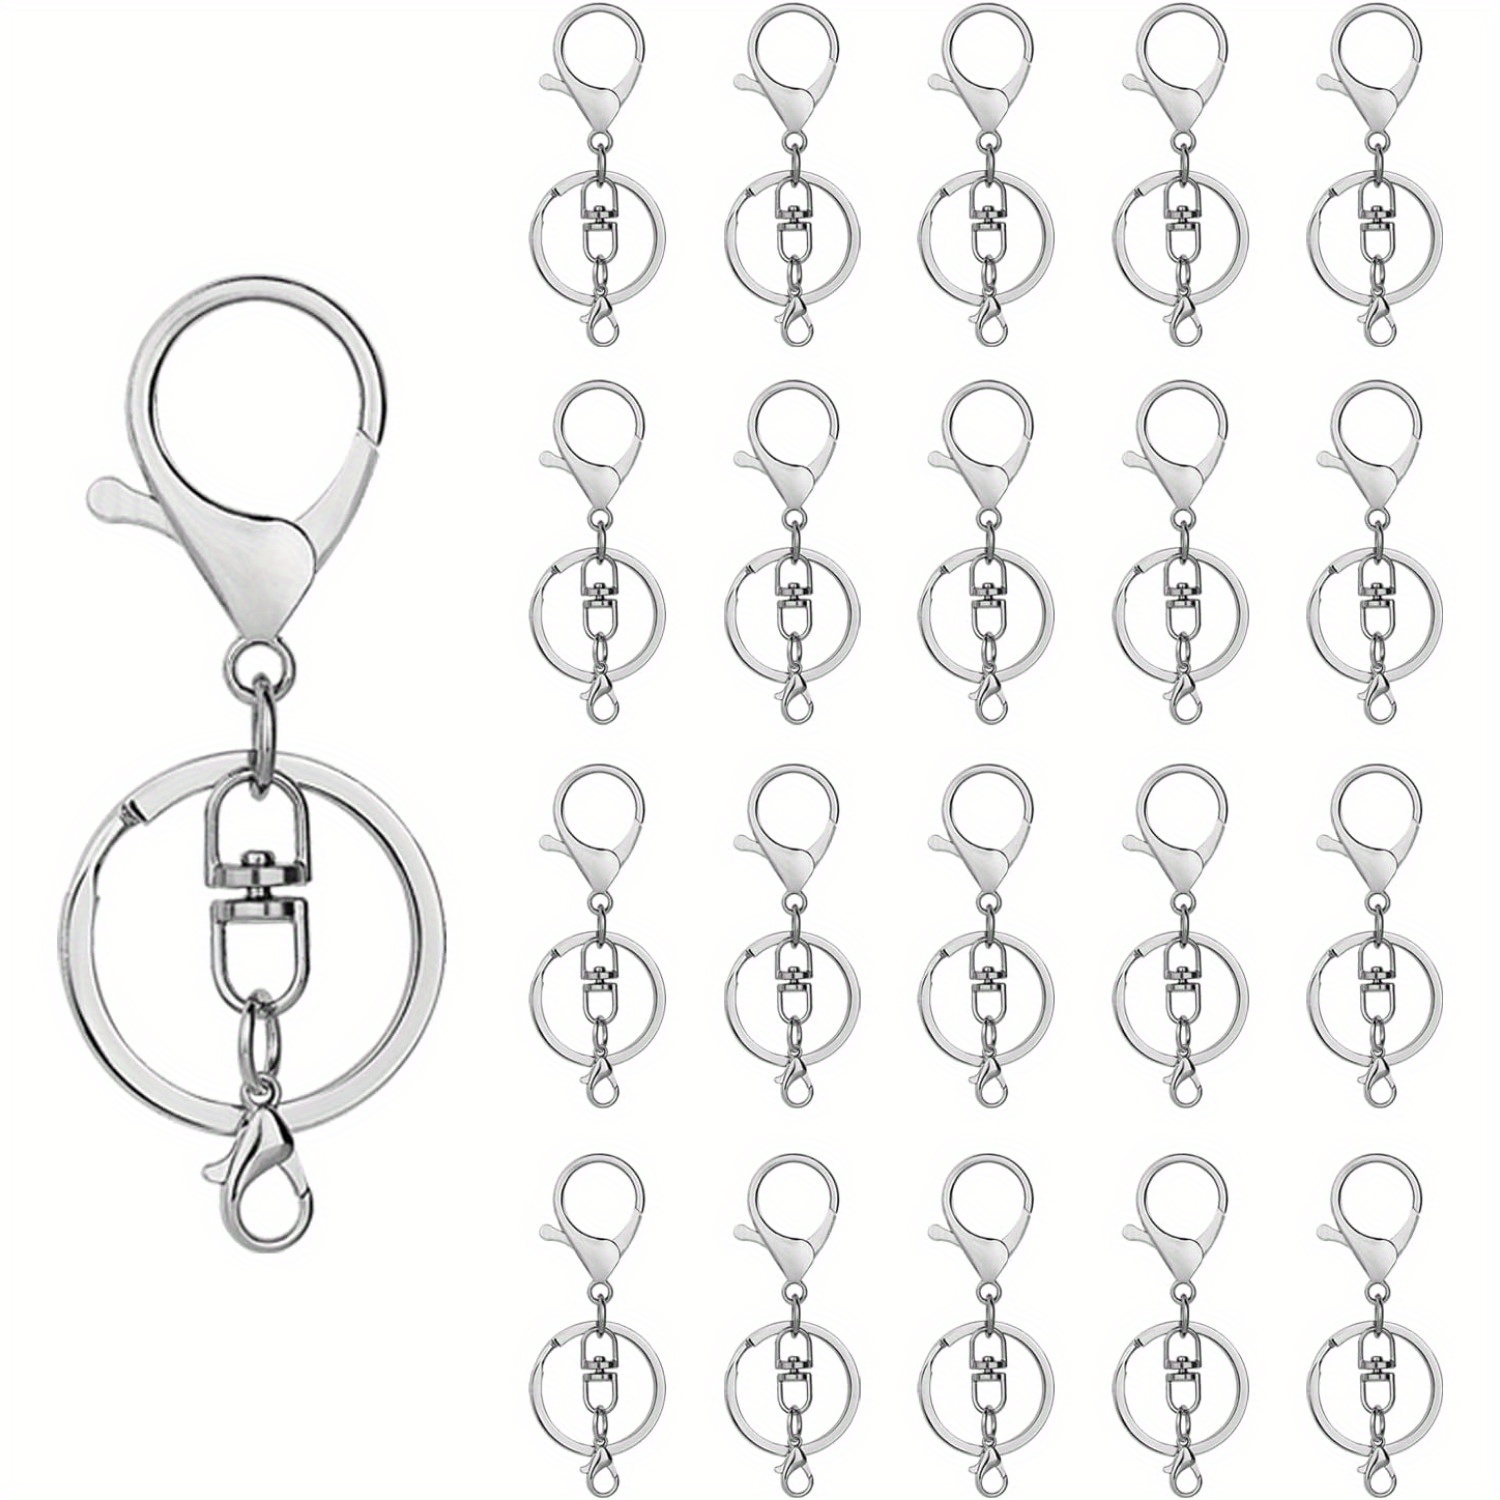 Clasp, Lobster Clasp Hook (Keychain), Grey, Alloy, 35mm x 15mm